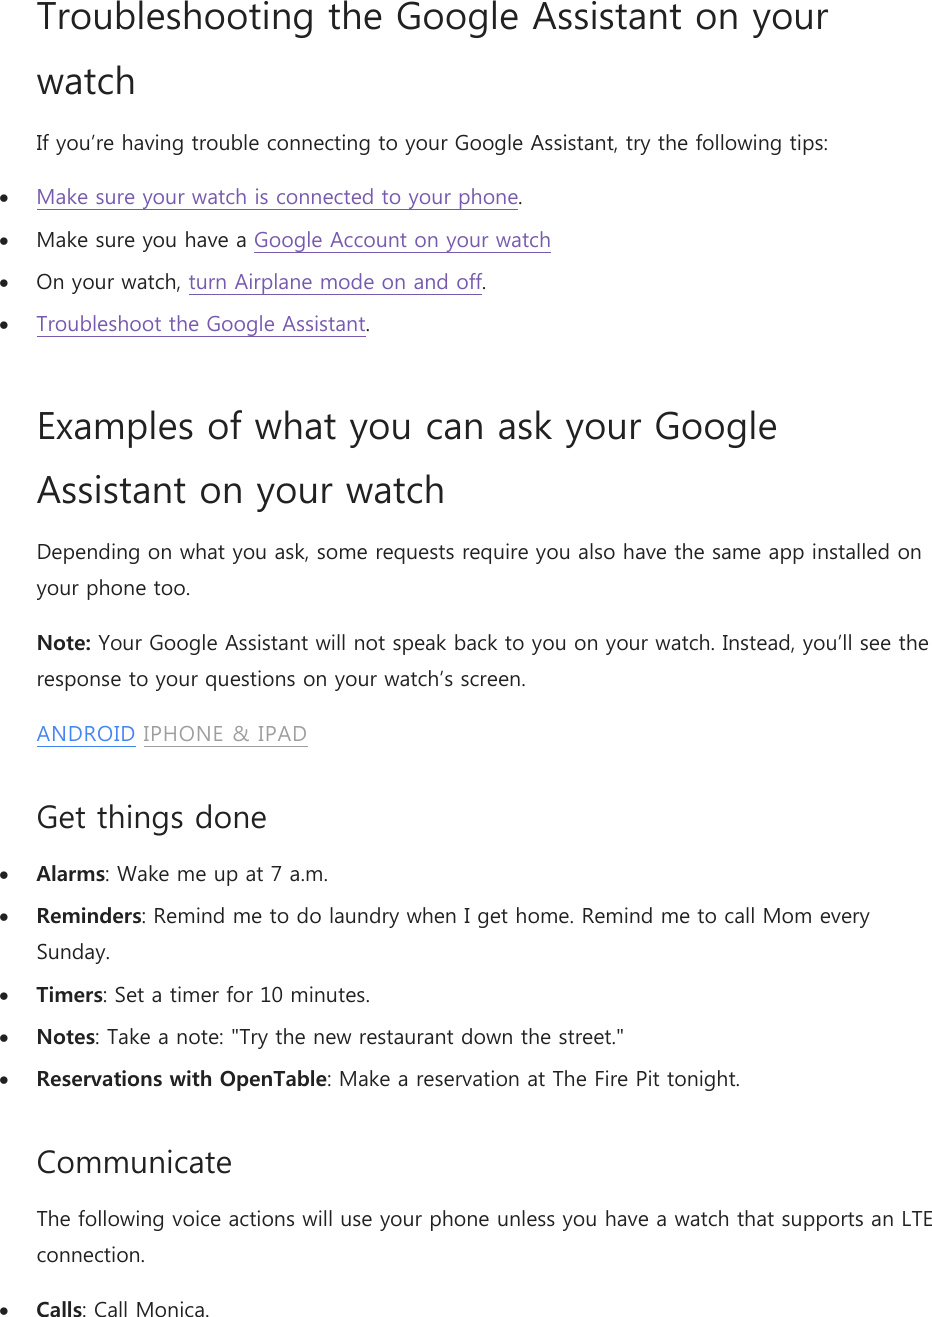 Troubleshooting the Google Assistant on your watch If you’re having trouble connecting to your Google Assistant, try the following tips:  Make sure your watch is connected to your phone.  Make sure you have a Google Account on your watch  On your watch, turn Airplane mode on and off.  Troubleshoot the Google Assistant. Examples of what you can ask your Google Assistant on your watch Depending on what you ask, some requests require you also have the same app installed on your phone too. Note: Your Google Assistant will not speak back to you on your watch. Instead, you’ll see the response to your questions on your watch’s screen. ANDROID IPHONE &amp; IPAD Get things done  Alarms: Wake me up at 7 a.m.  Reminders: Remind me to do laundry when I get home. Remind me to call Mom every Sunday.  Timers: Set a timer for 10 minutes.  Notes: Take a note: &quot;Try the new restaurant down the street.&quot;  Reservations with OpenTable: Make a reservation at The Fire Pit tonight. Communicate The following voice actions will use your phone unless you have a watch that supports an LTE connection.  Calls: Call Monica. 